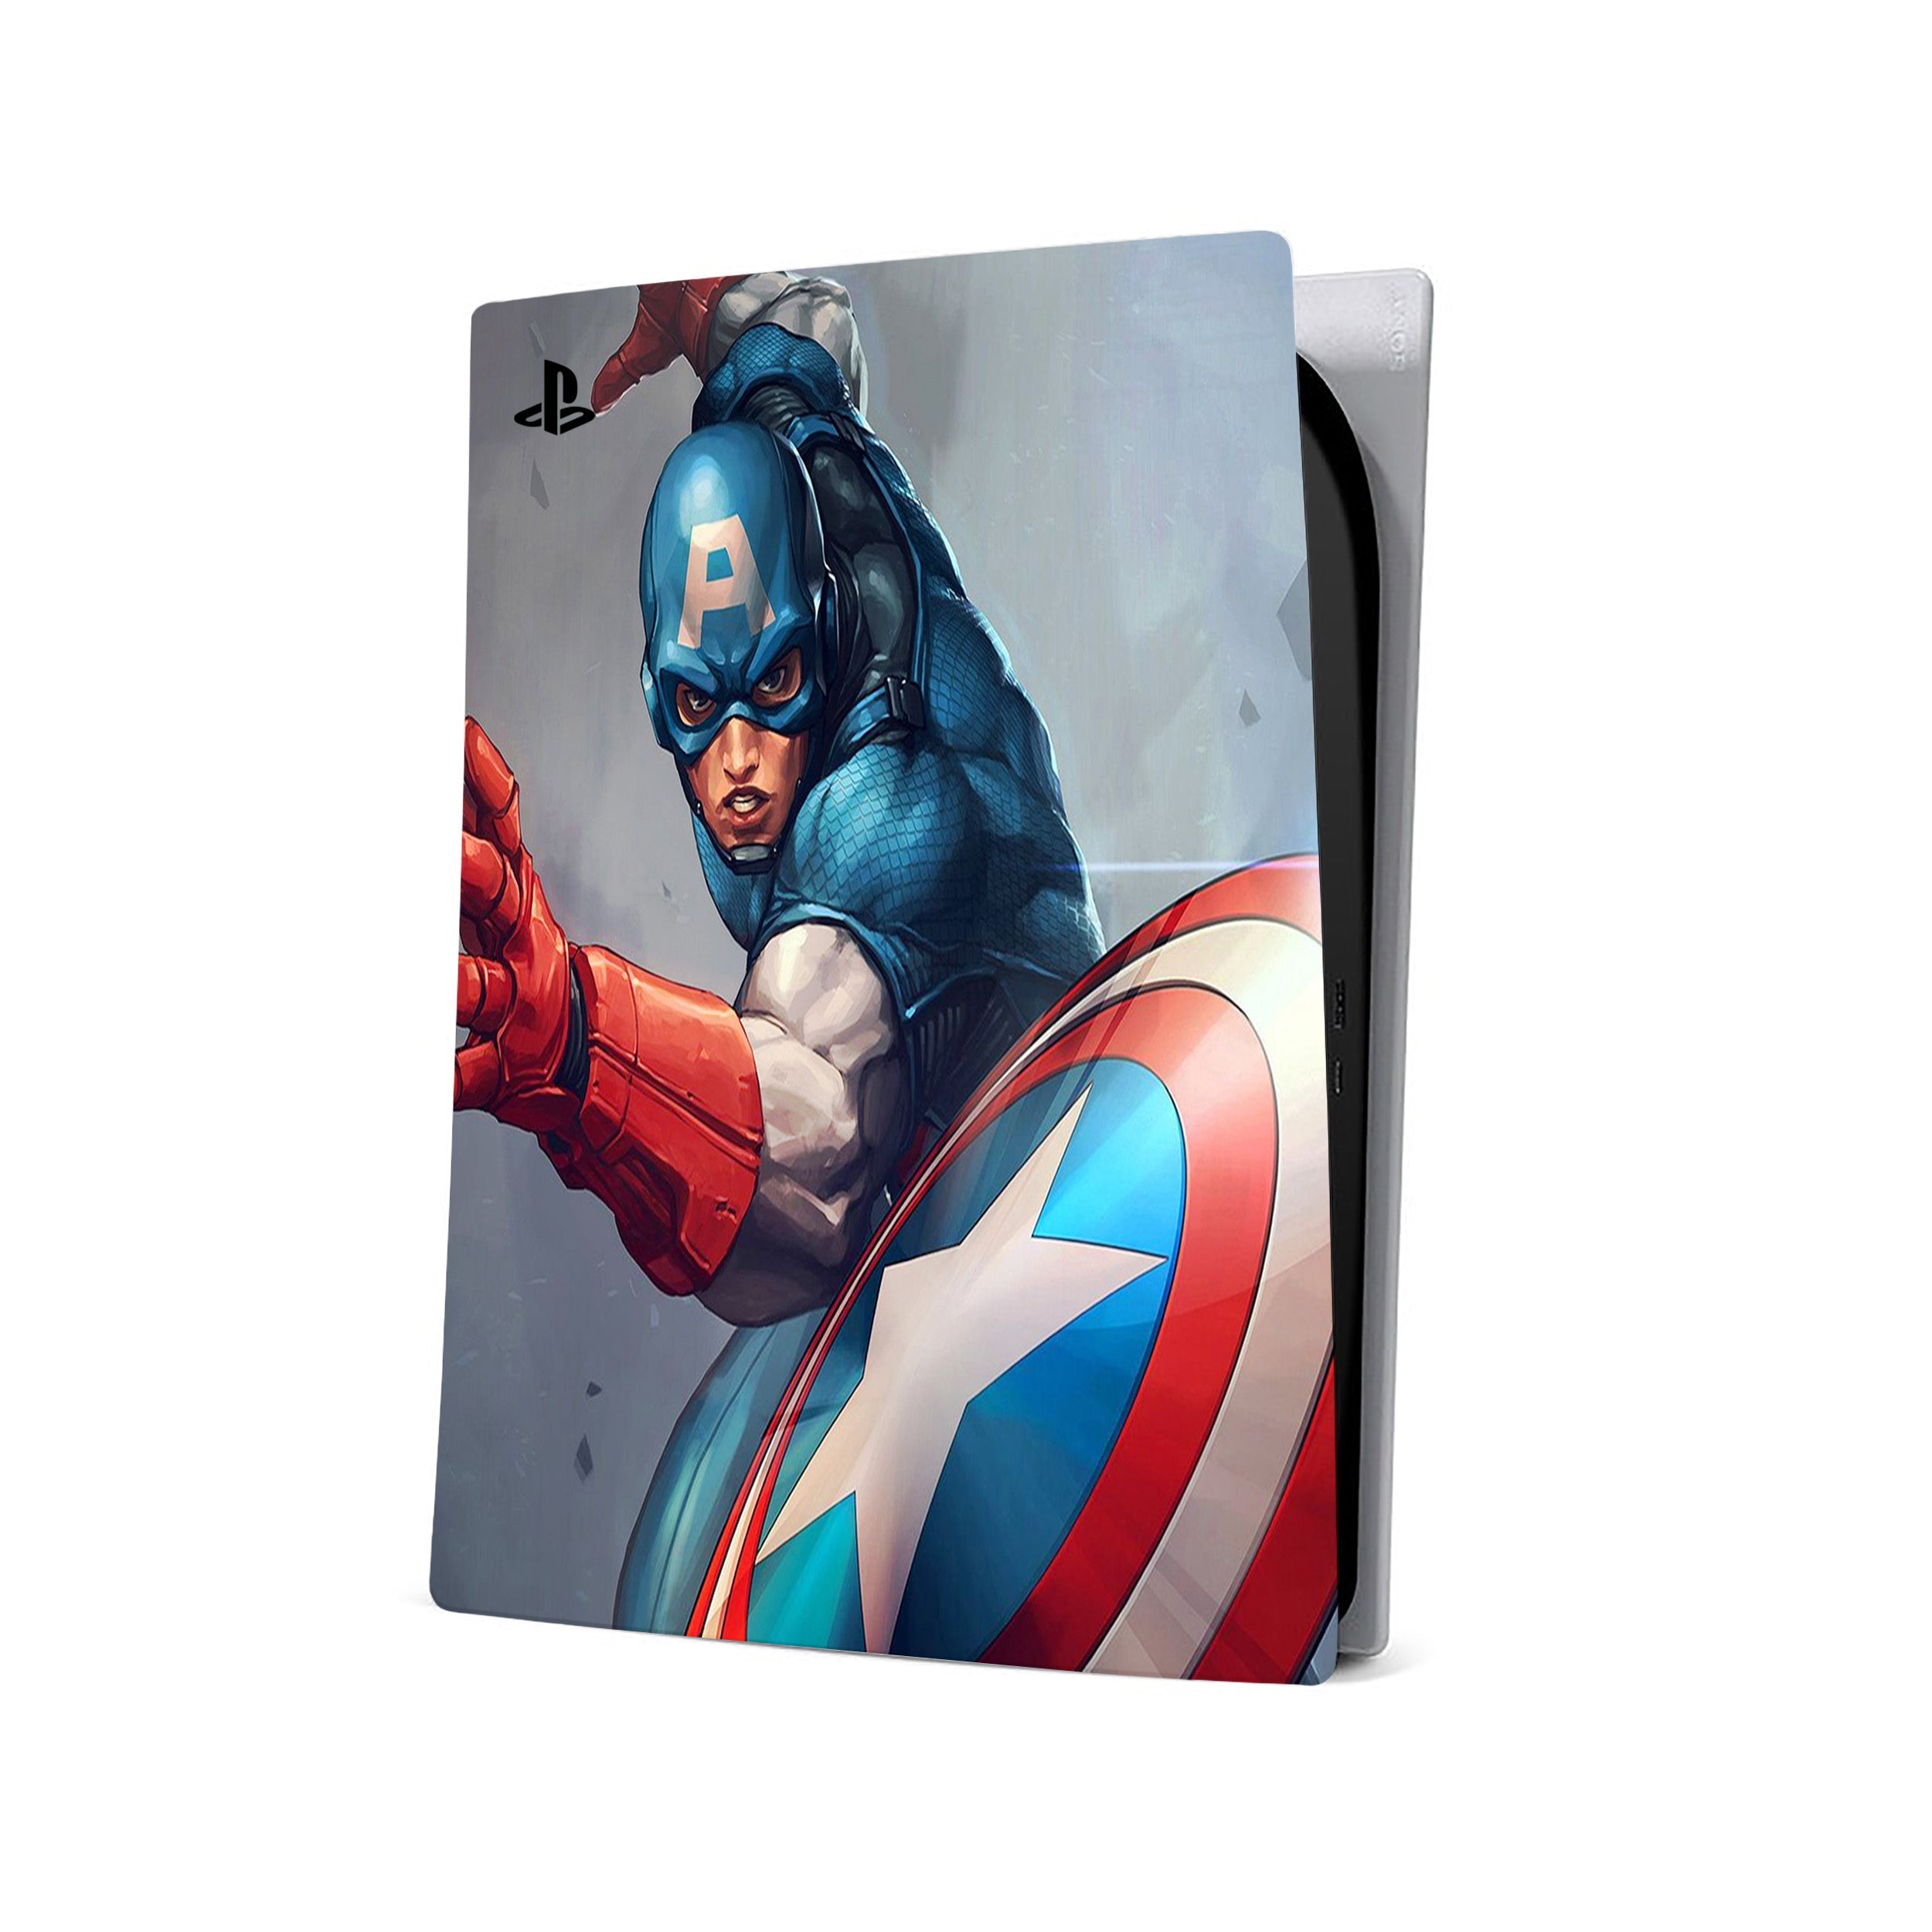 A video game skin featuring a Marvel Comics Captain America design for the PS5.